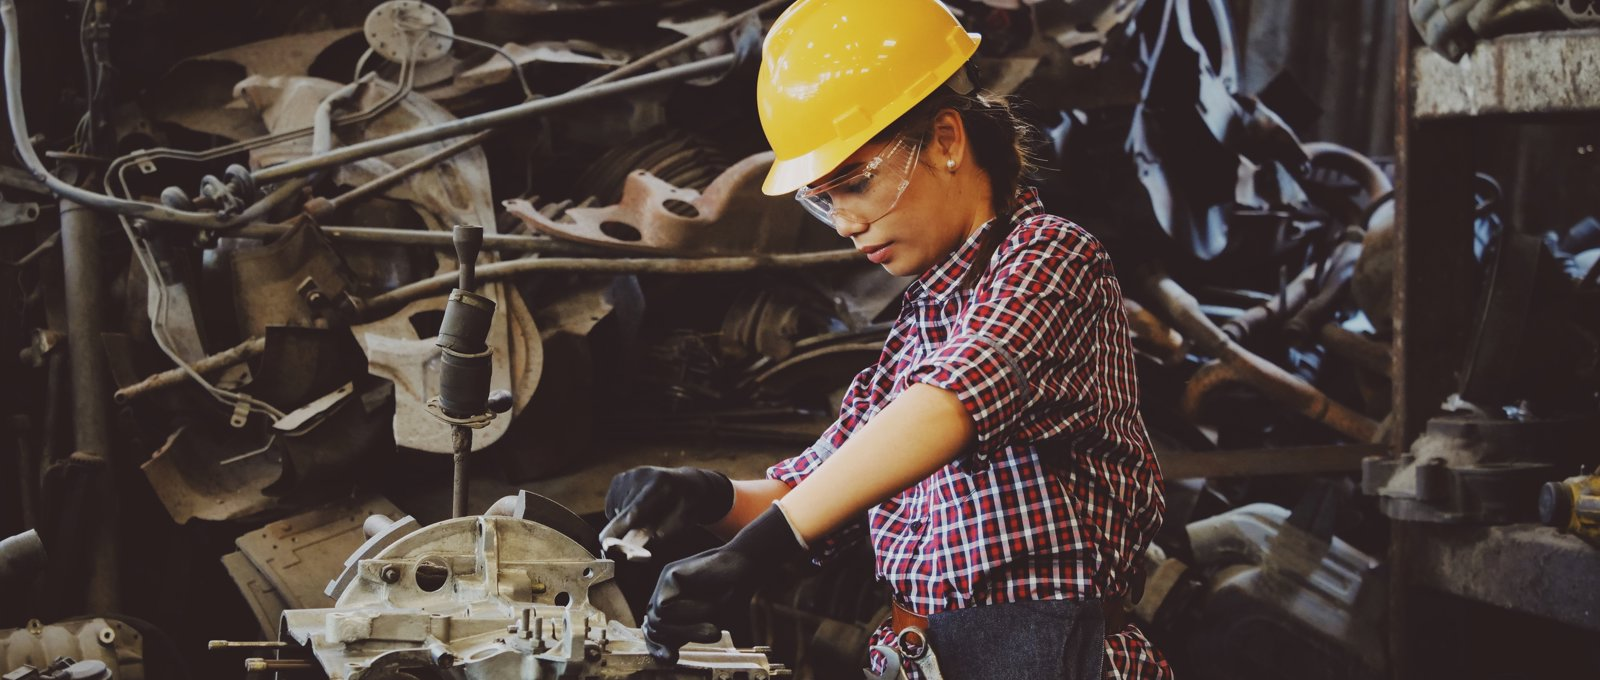 A woman in a check shirt, gloves, a yellow hard hat and safety goggles, fixing a car part using a spanner. She has a navy tool belt at her waist and is surrounded by other car parts.